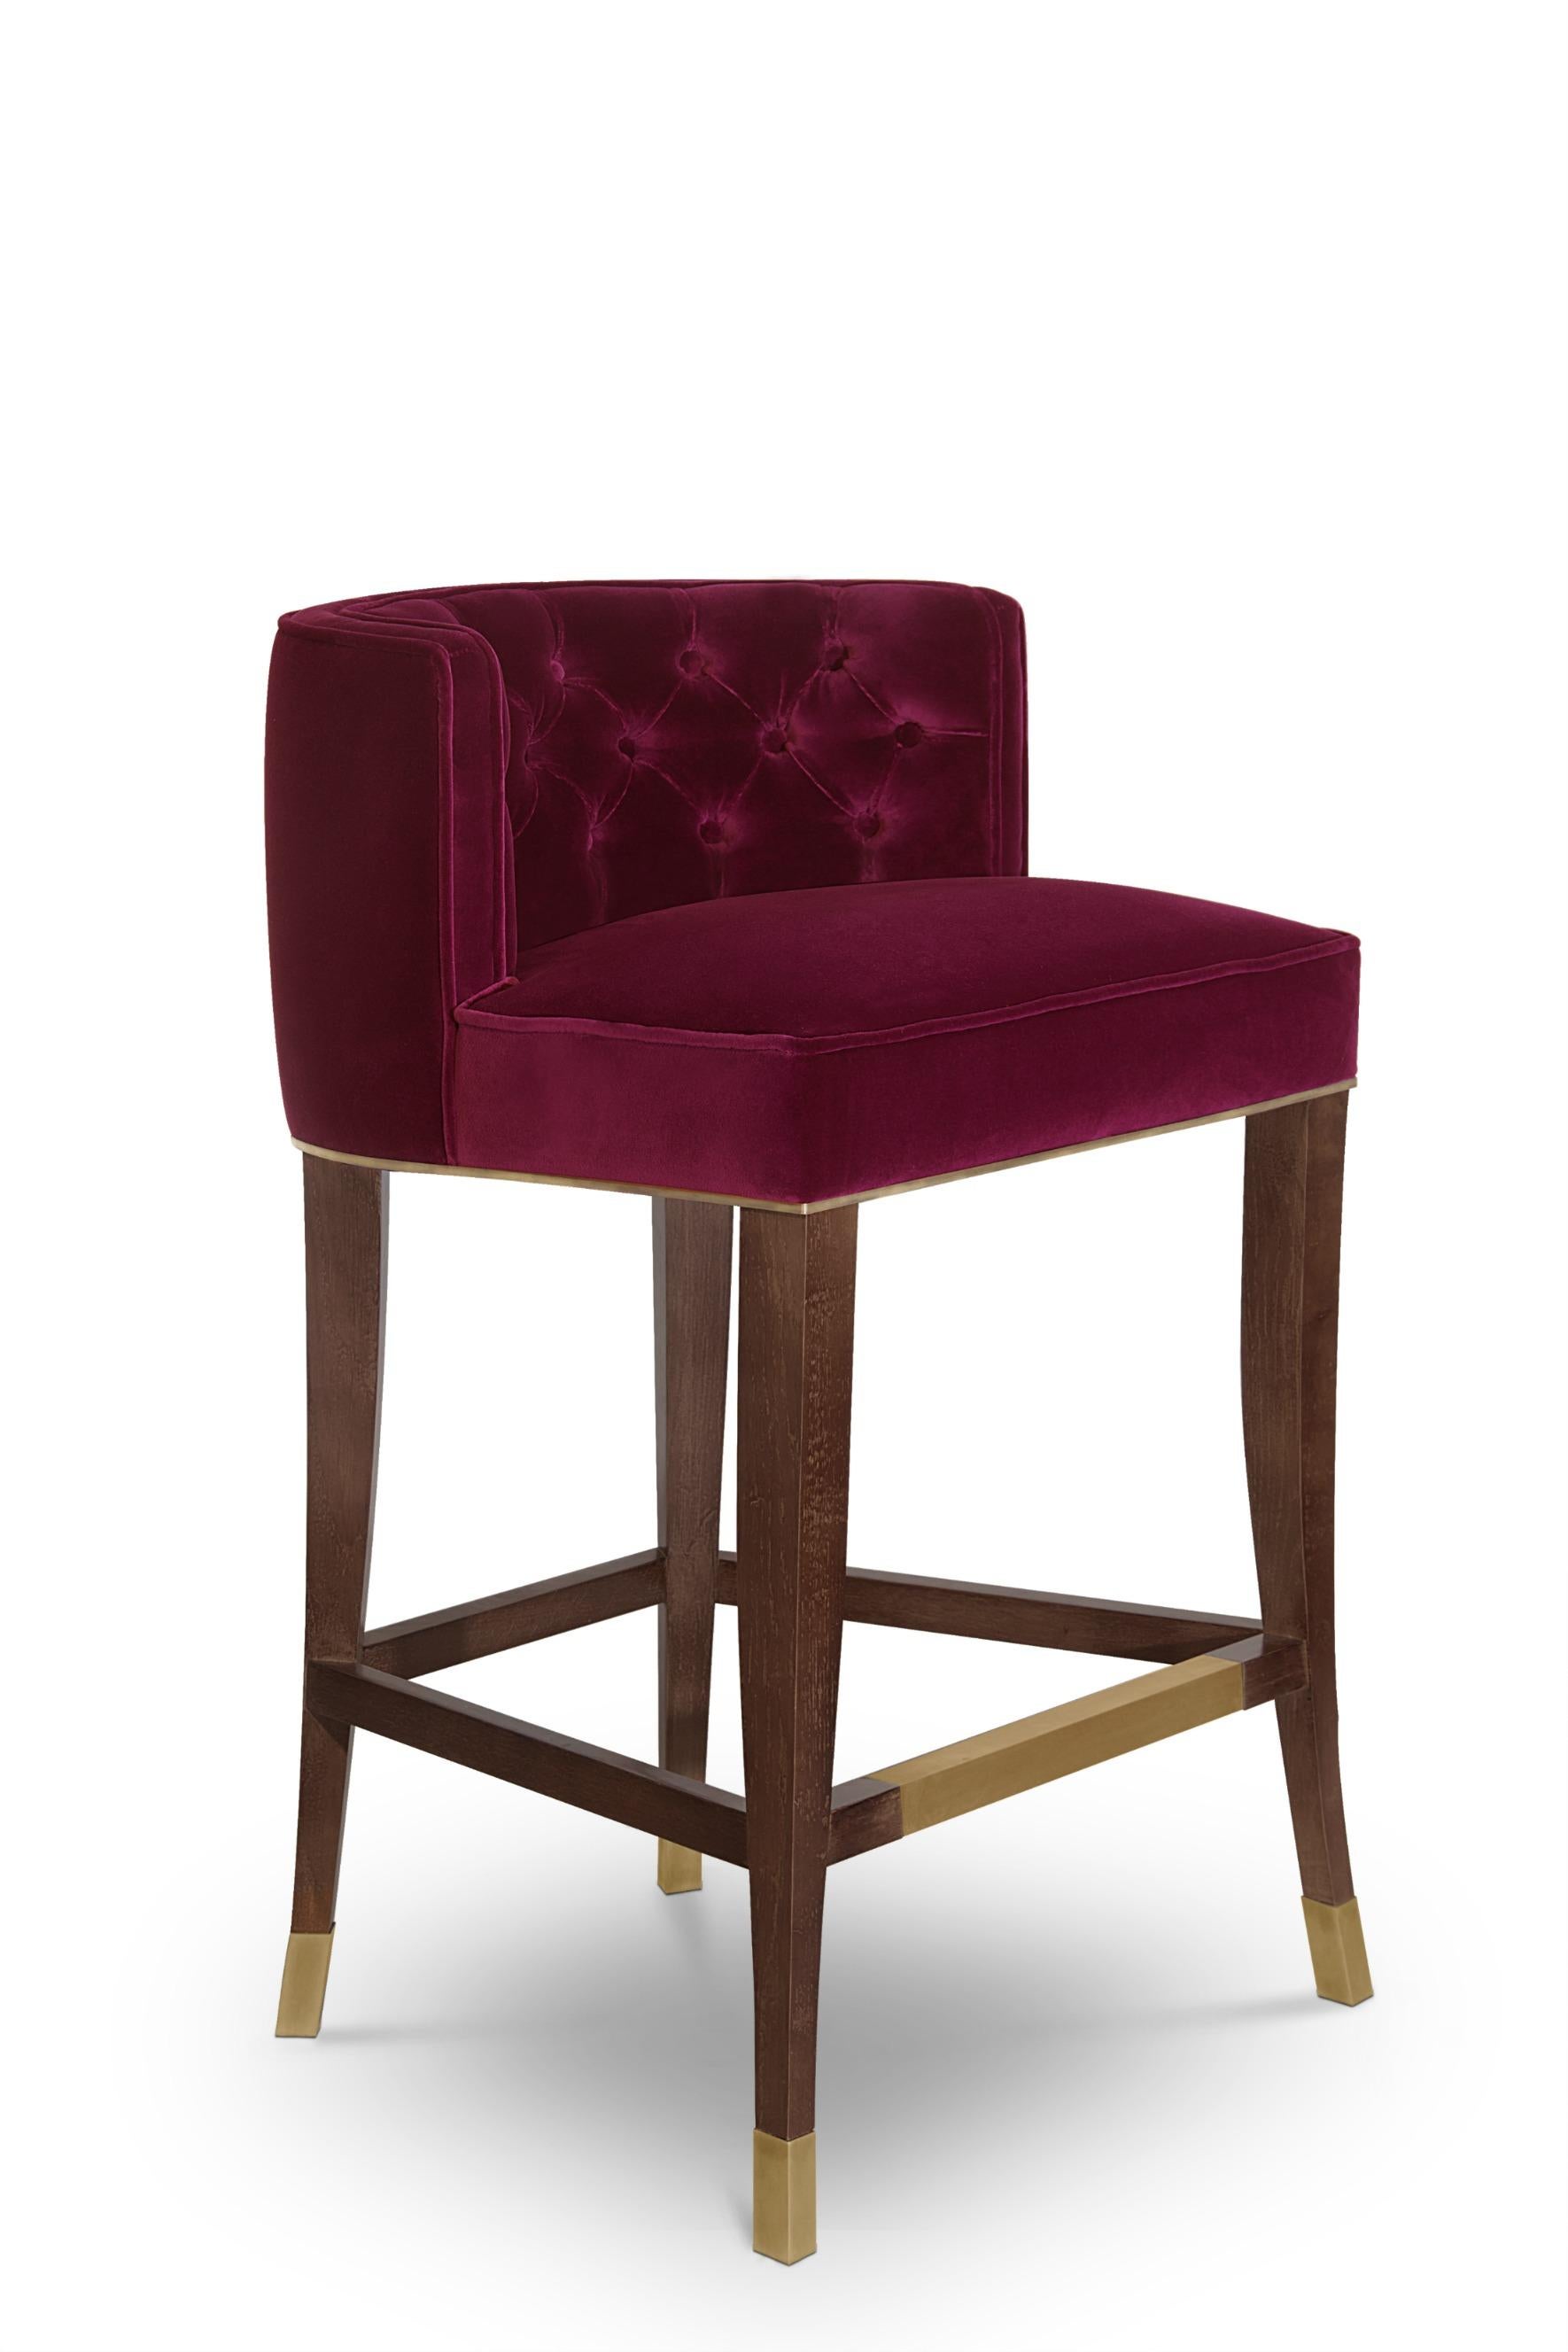 With origins in France, the House of Bourbon was a dynasty known for its class and luxury. Bourbon counter stool embodies this opulence through its button-tufted inner back, rich cotton velvet and legs in ash with walnut stain matte varnish. This